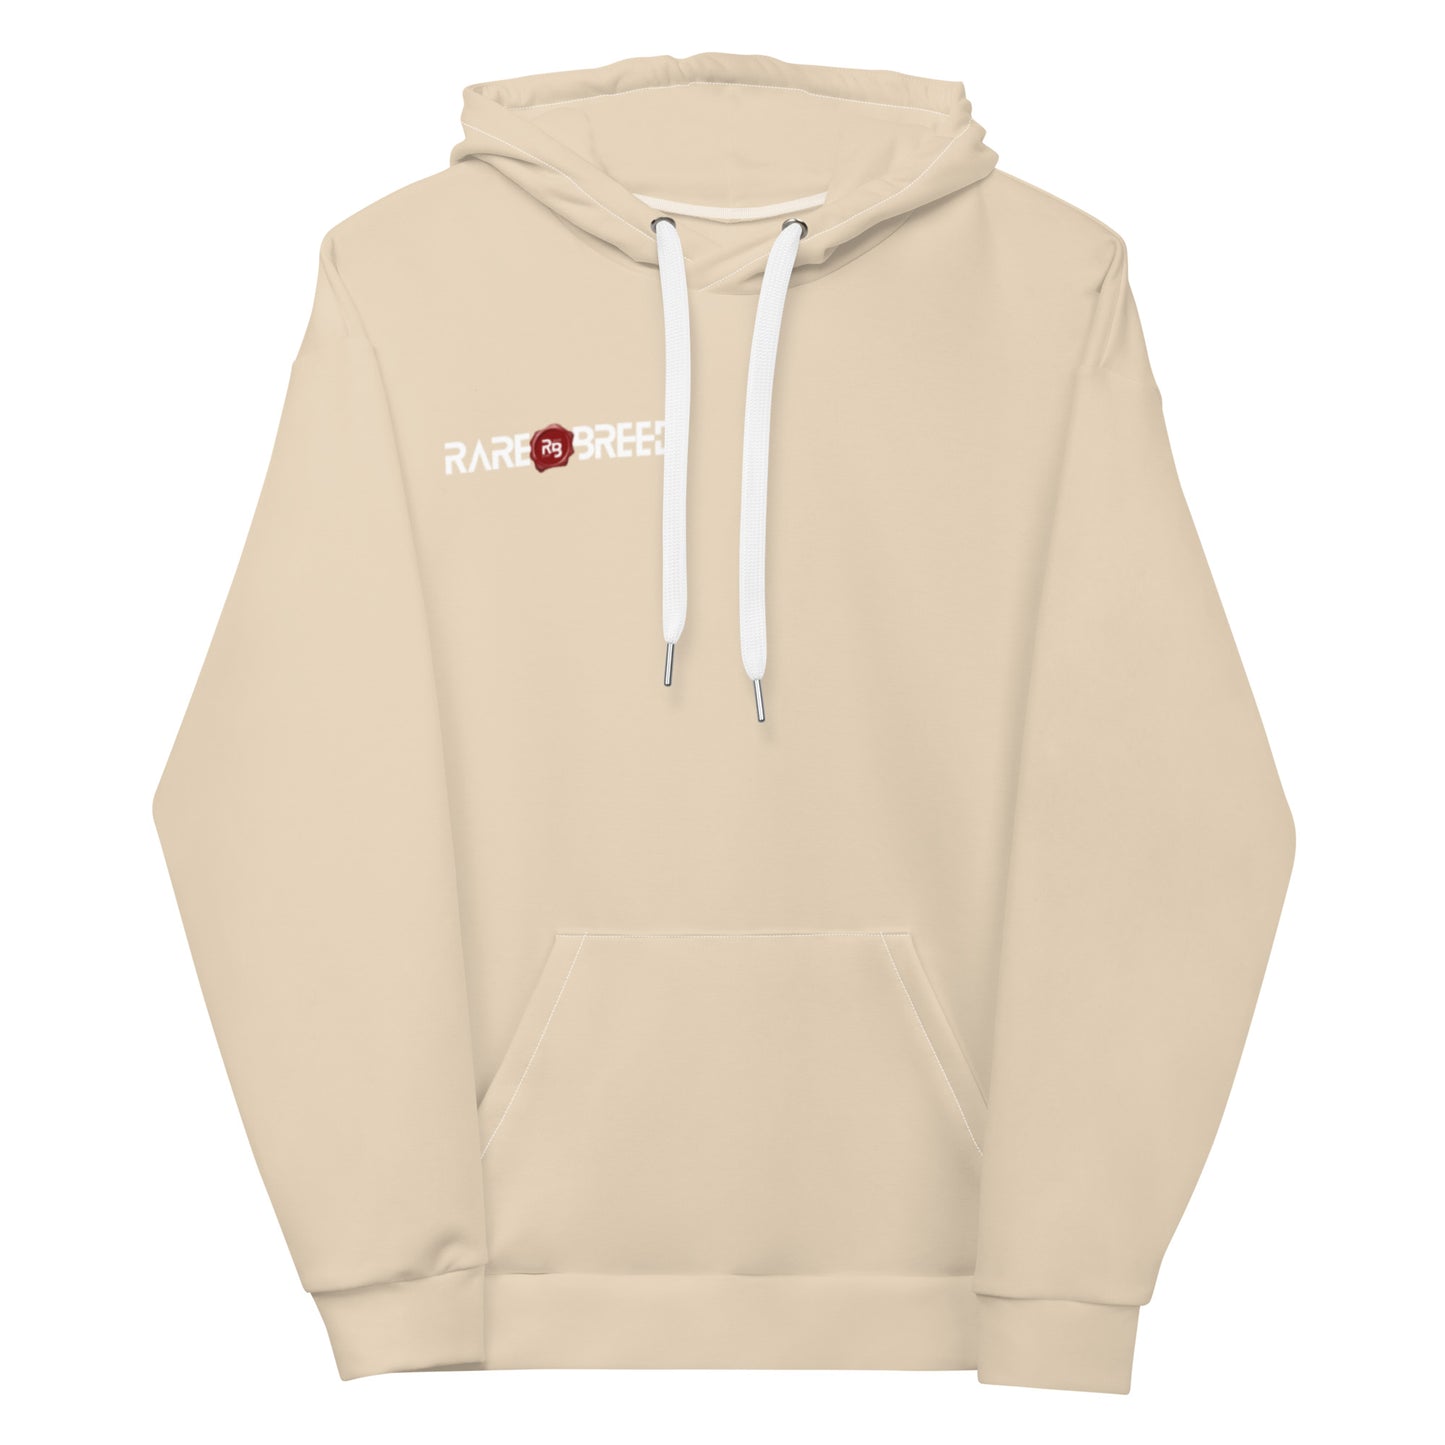 Classic Rare Breed Hoodie (champagne)